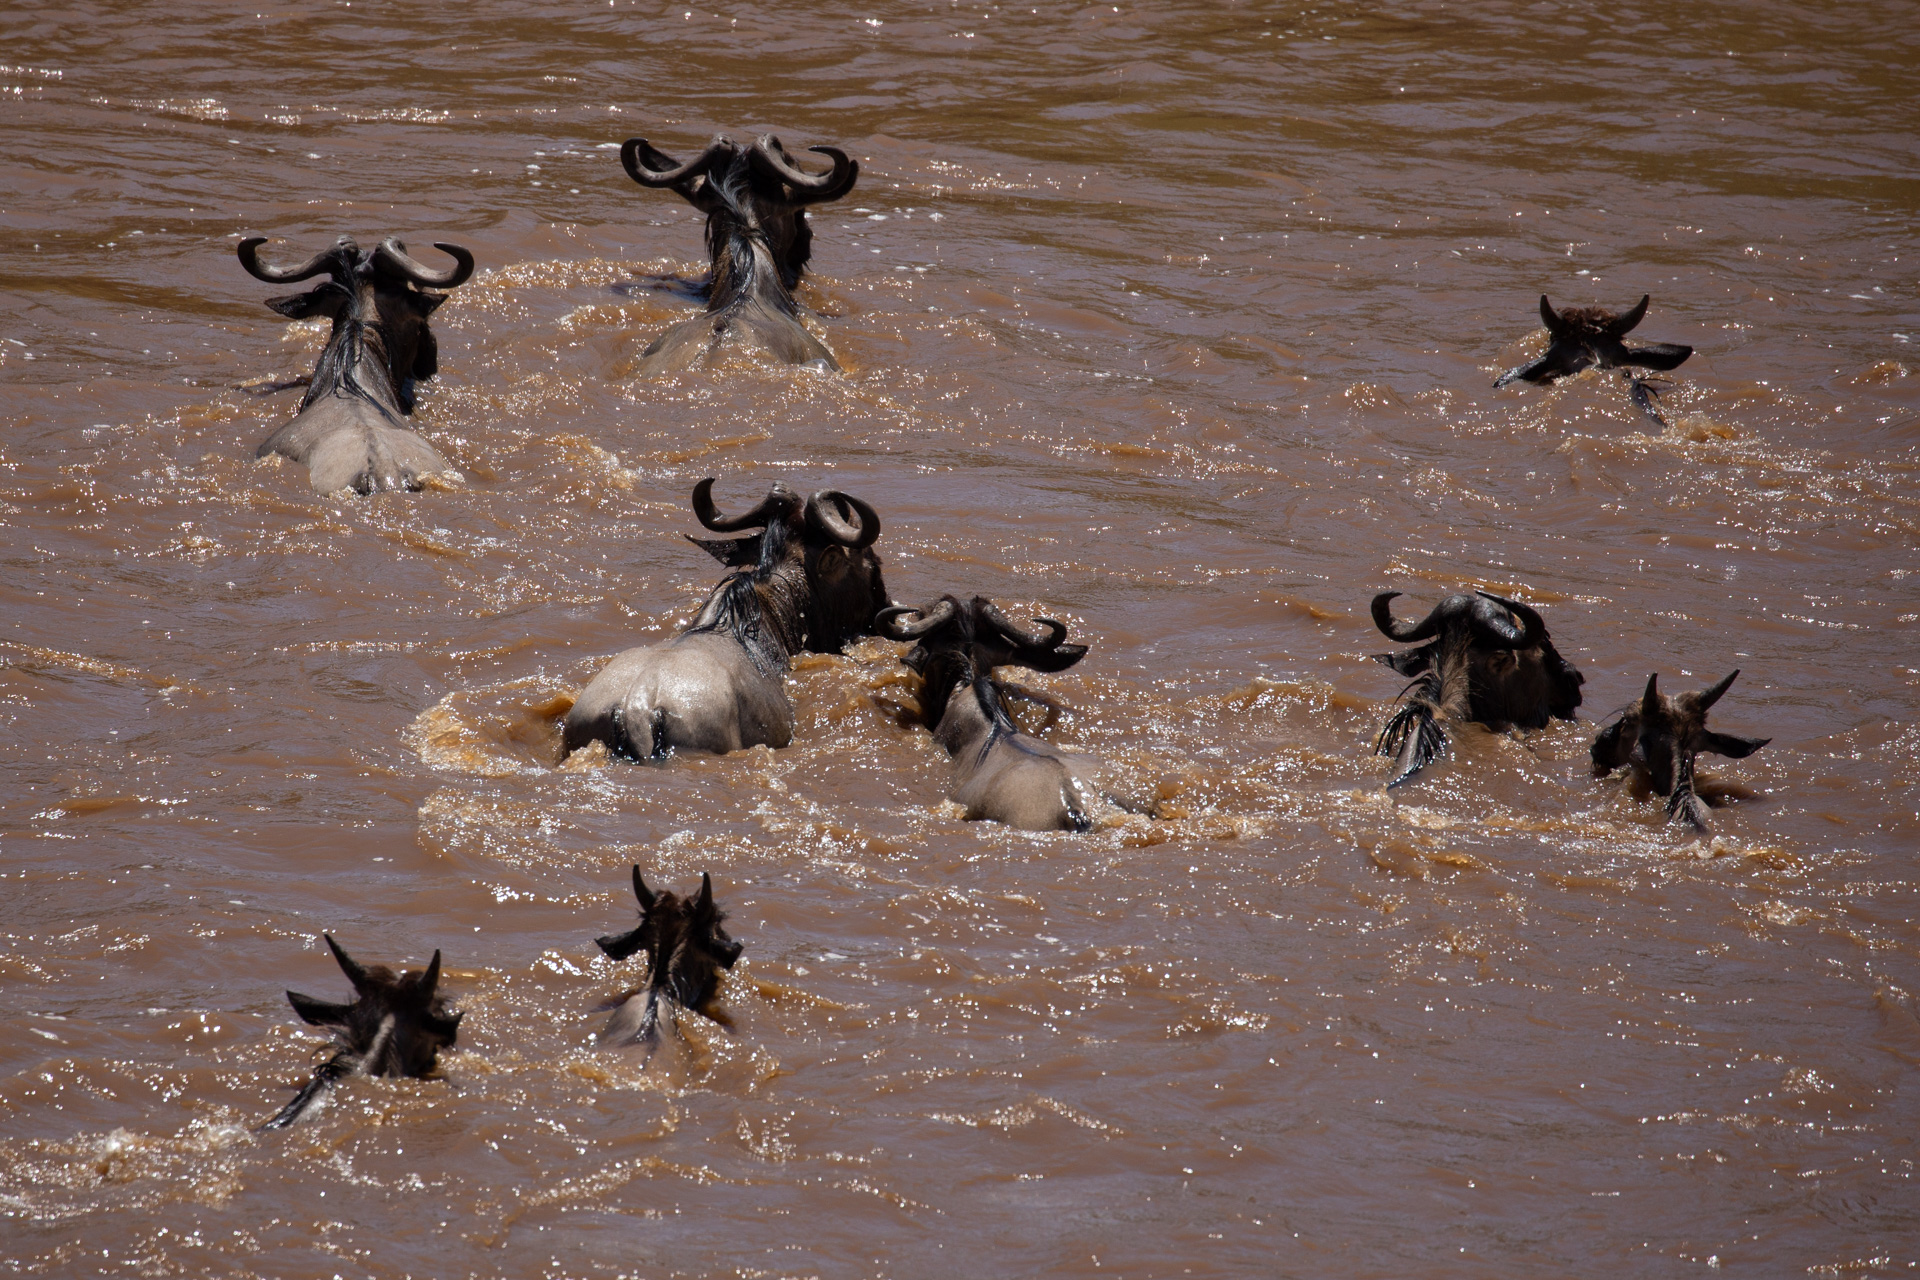 The crossing in the Mara